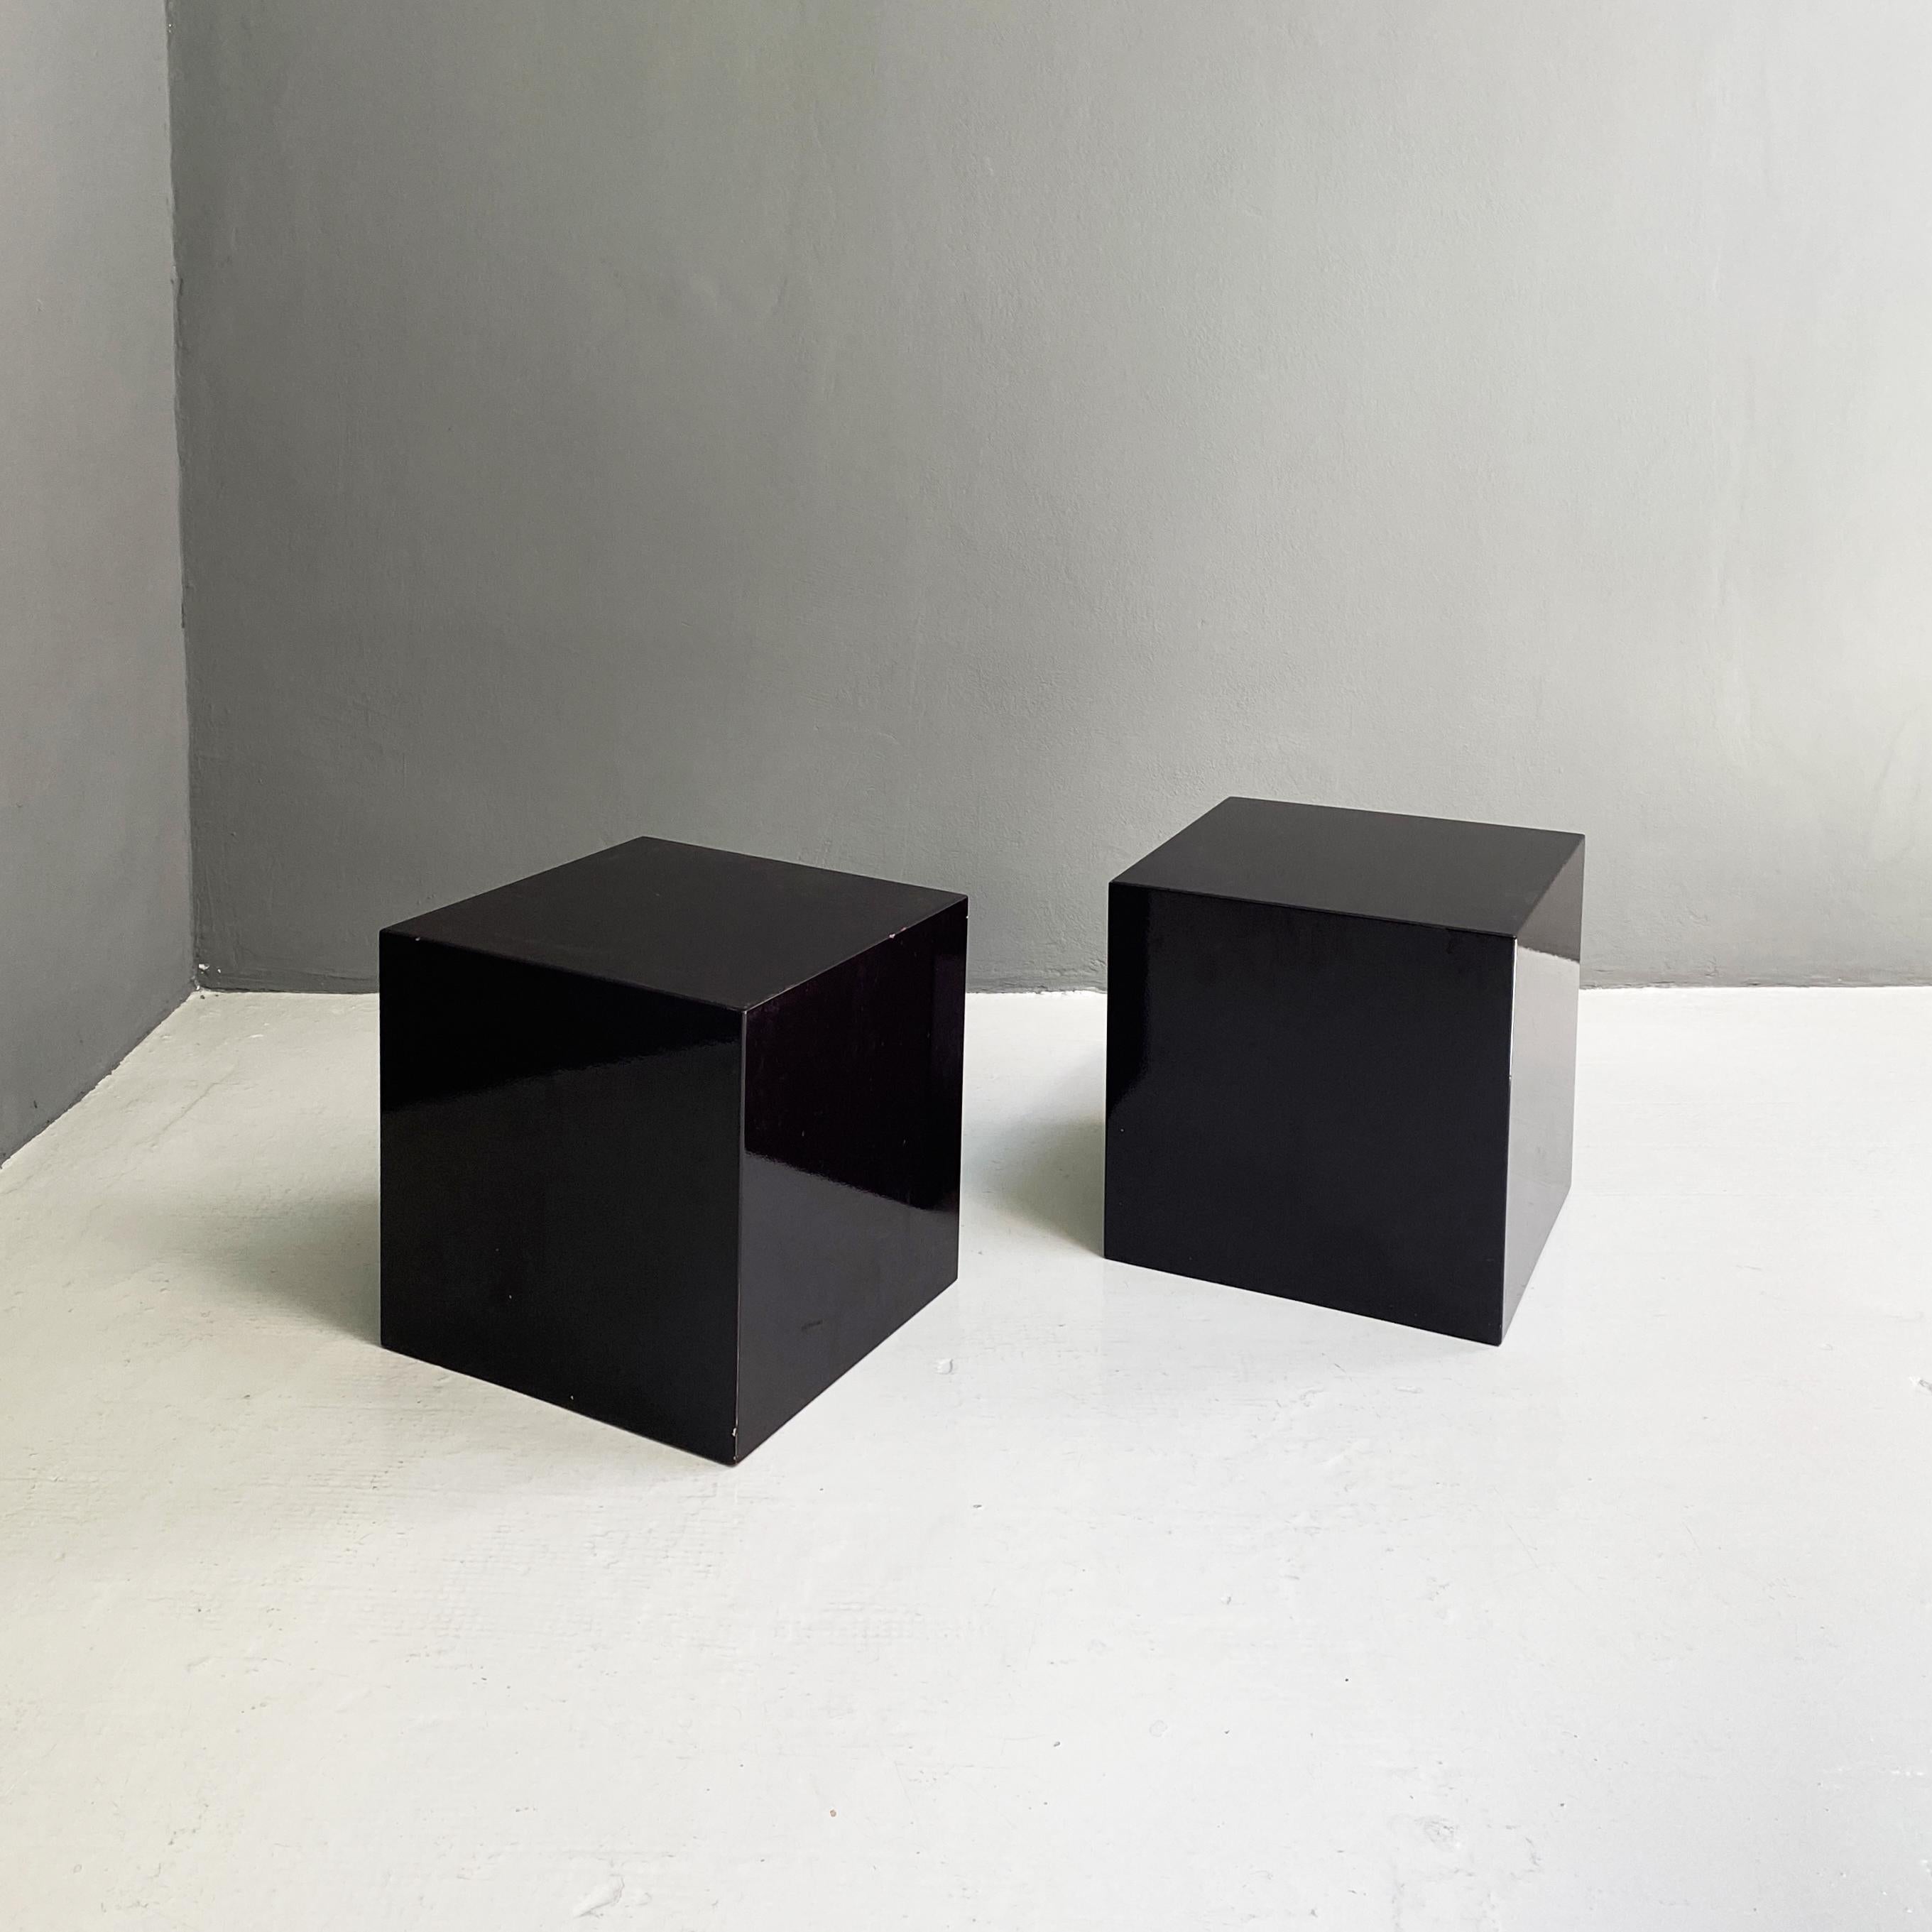 Cube-Shaped Coffee Tables or Bedside Tables in Dark Brown Lacquered Wood, 1990s  In Good Condition For Sale In MIlano, IT